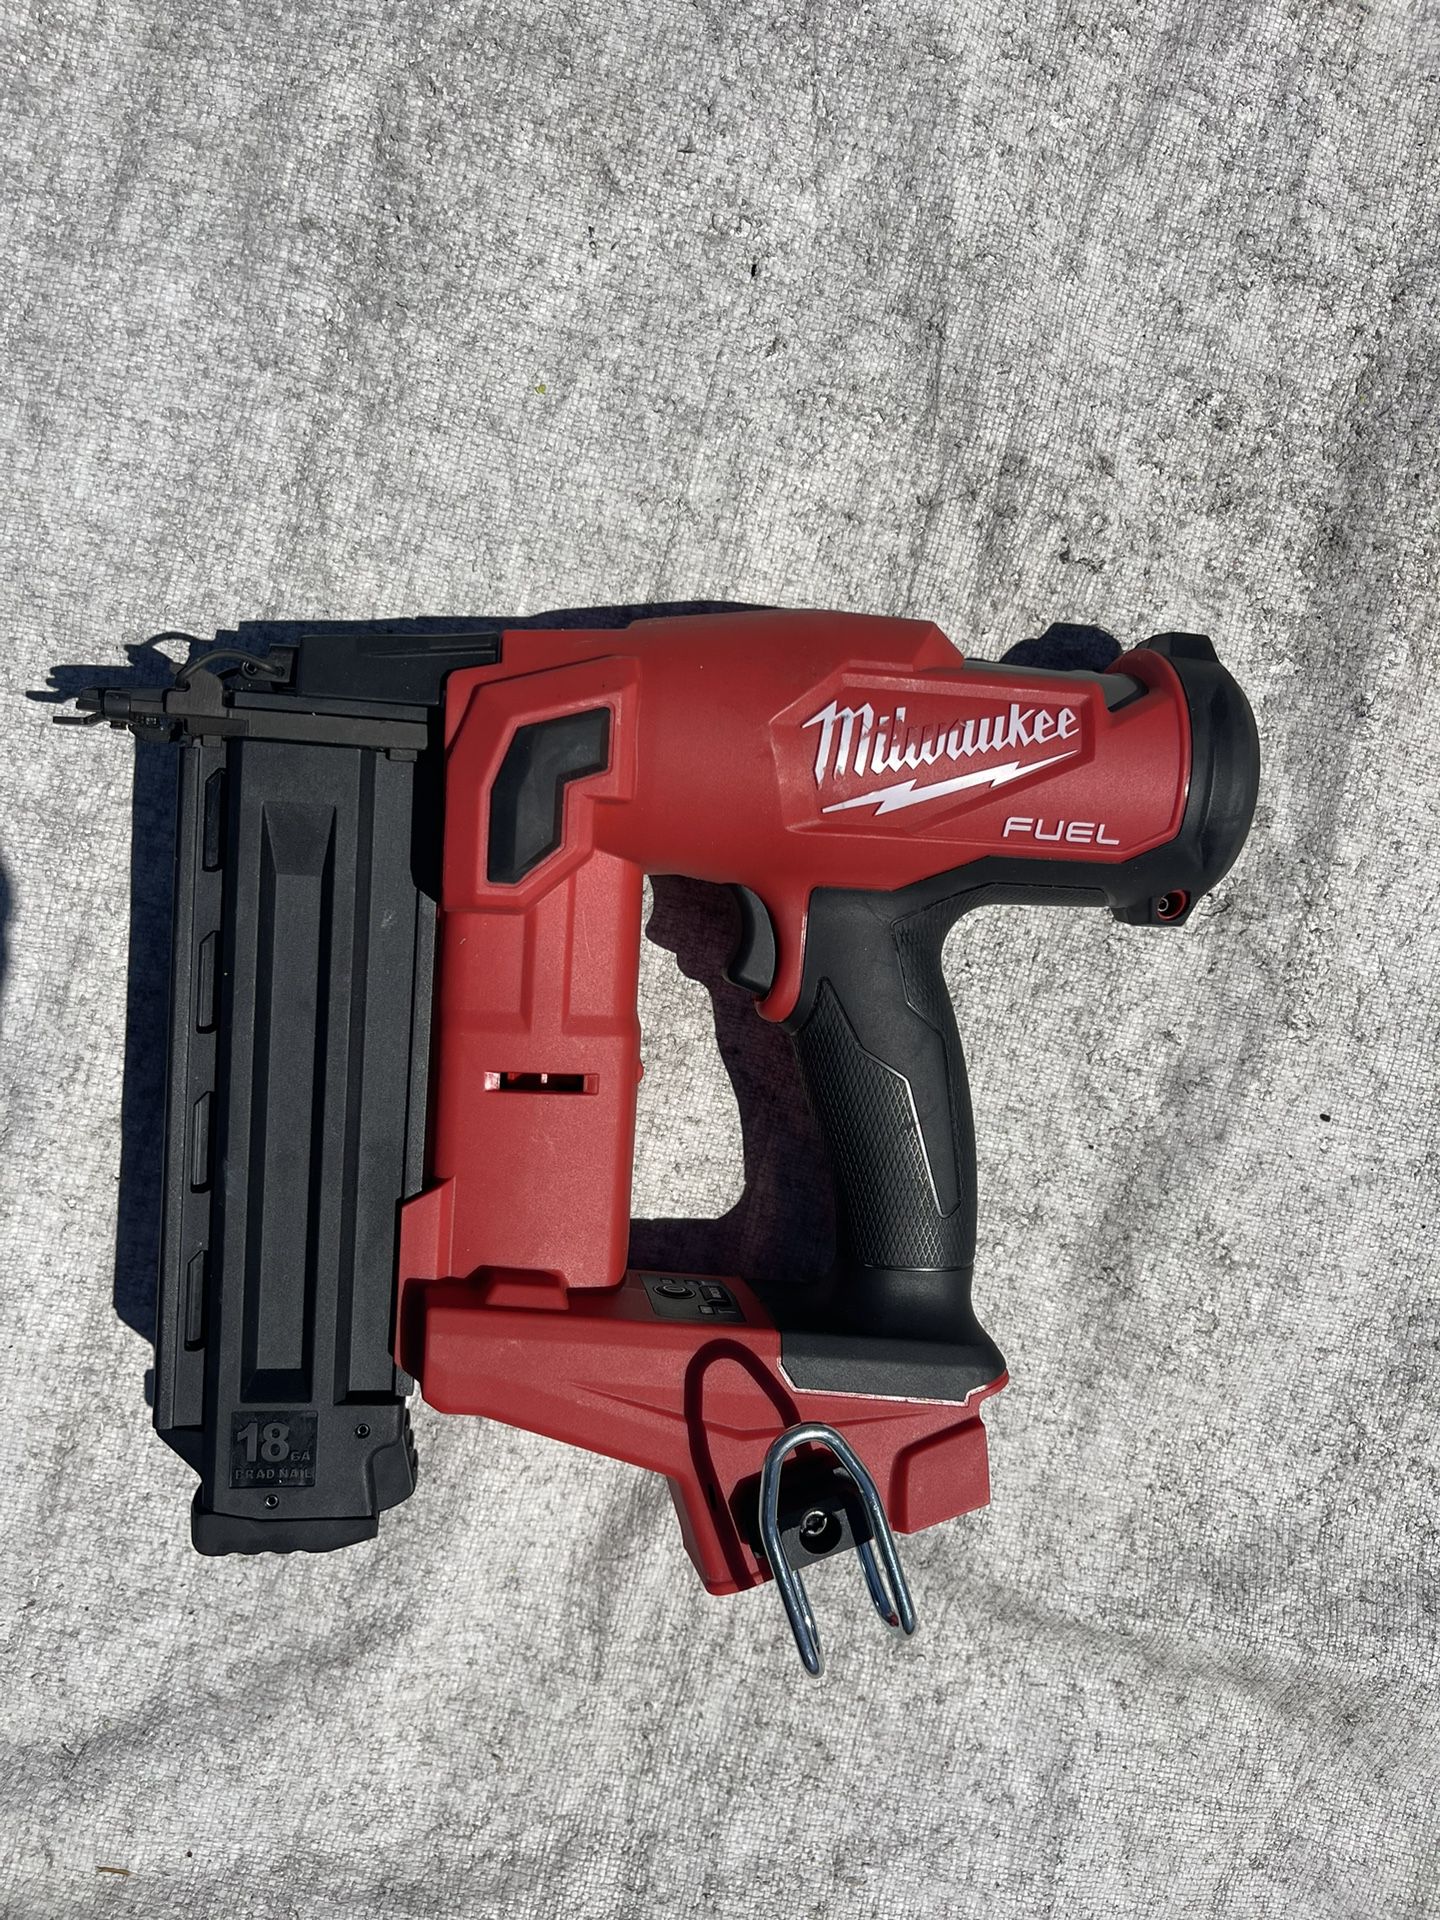 Milwaukee M18 FUEL 18-Volt Lithium-Ion Brushless Cordless Gen II 18-Gauge Brad Nailer (Tool-Only)solo Se Provo 